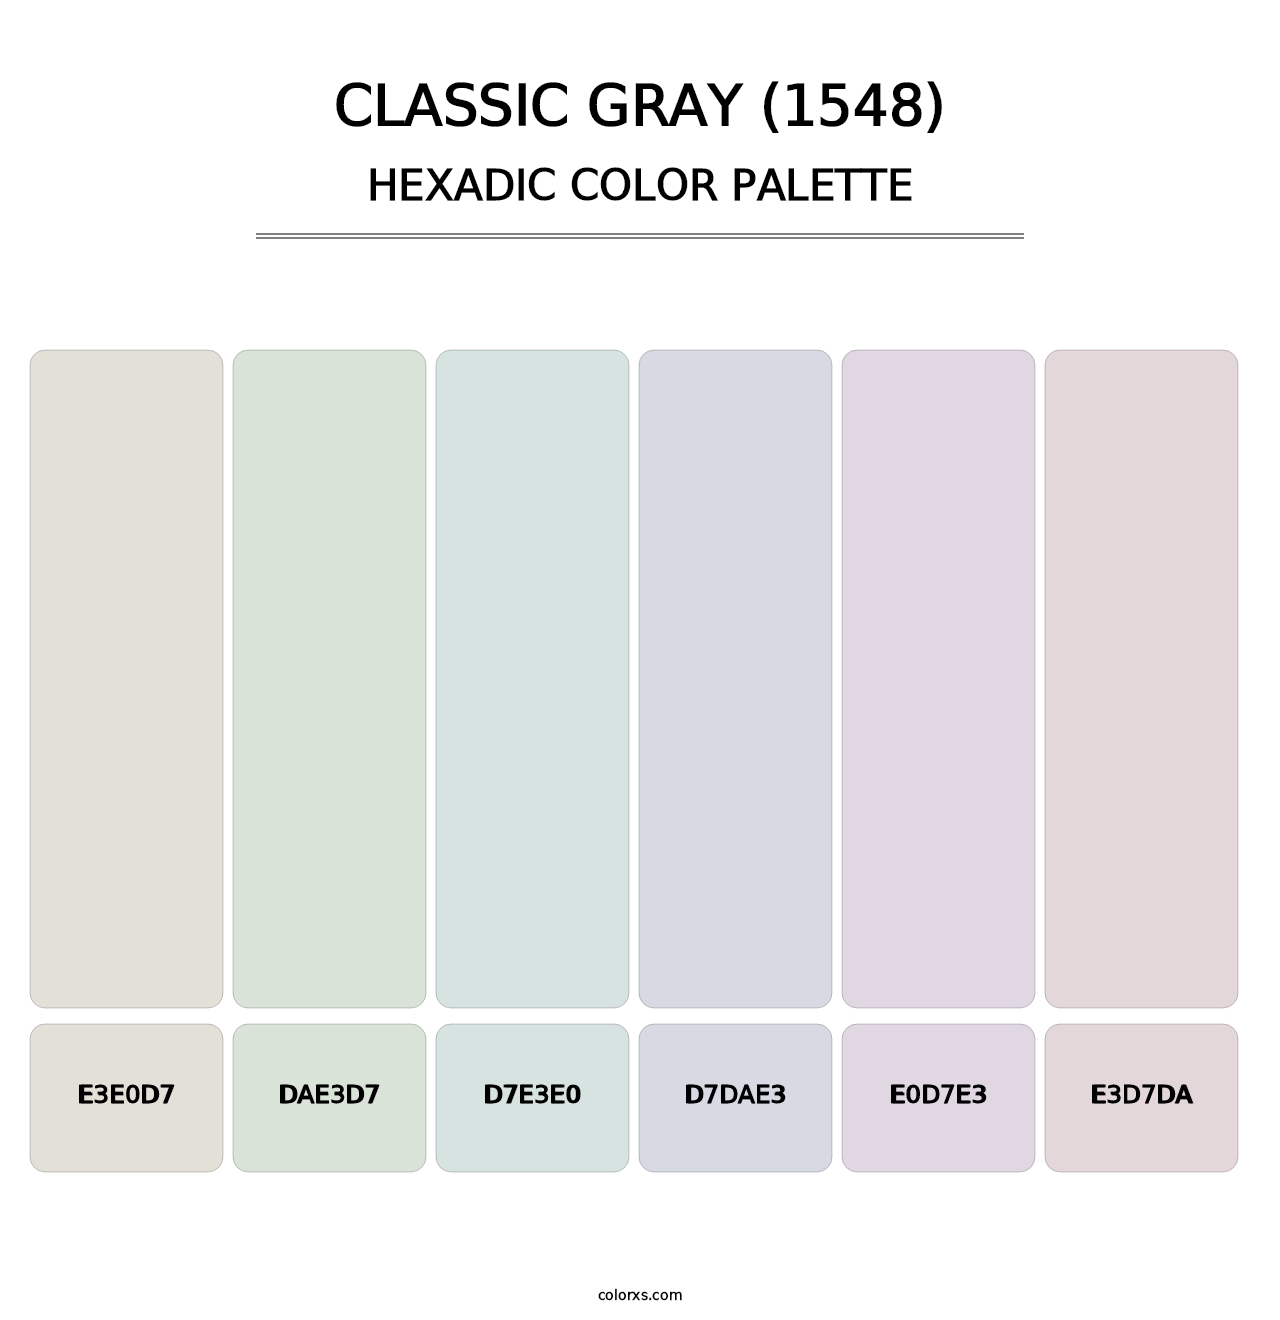 Classic Gray (1548) - Hexadic Color Palette